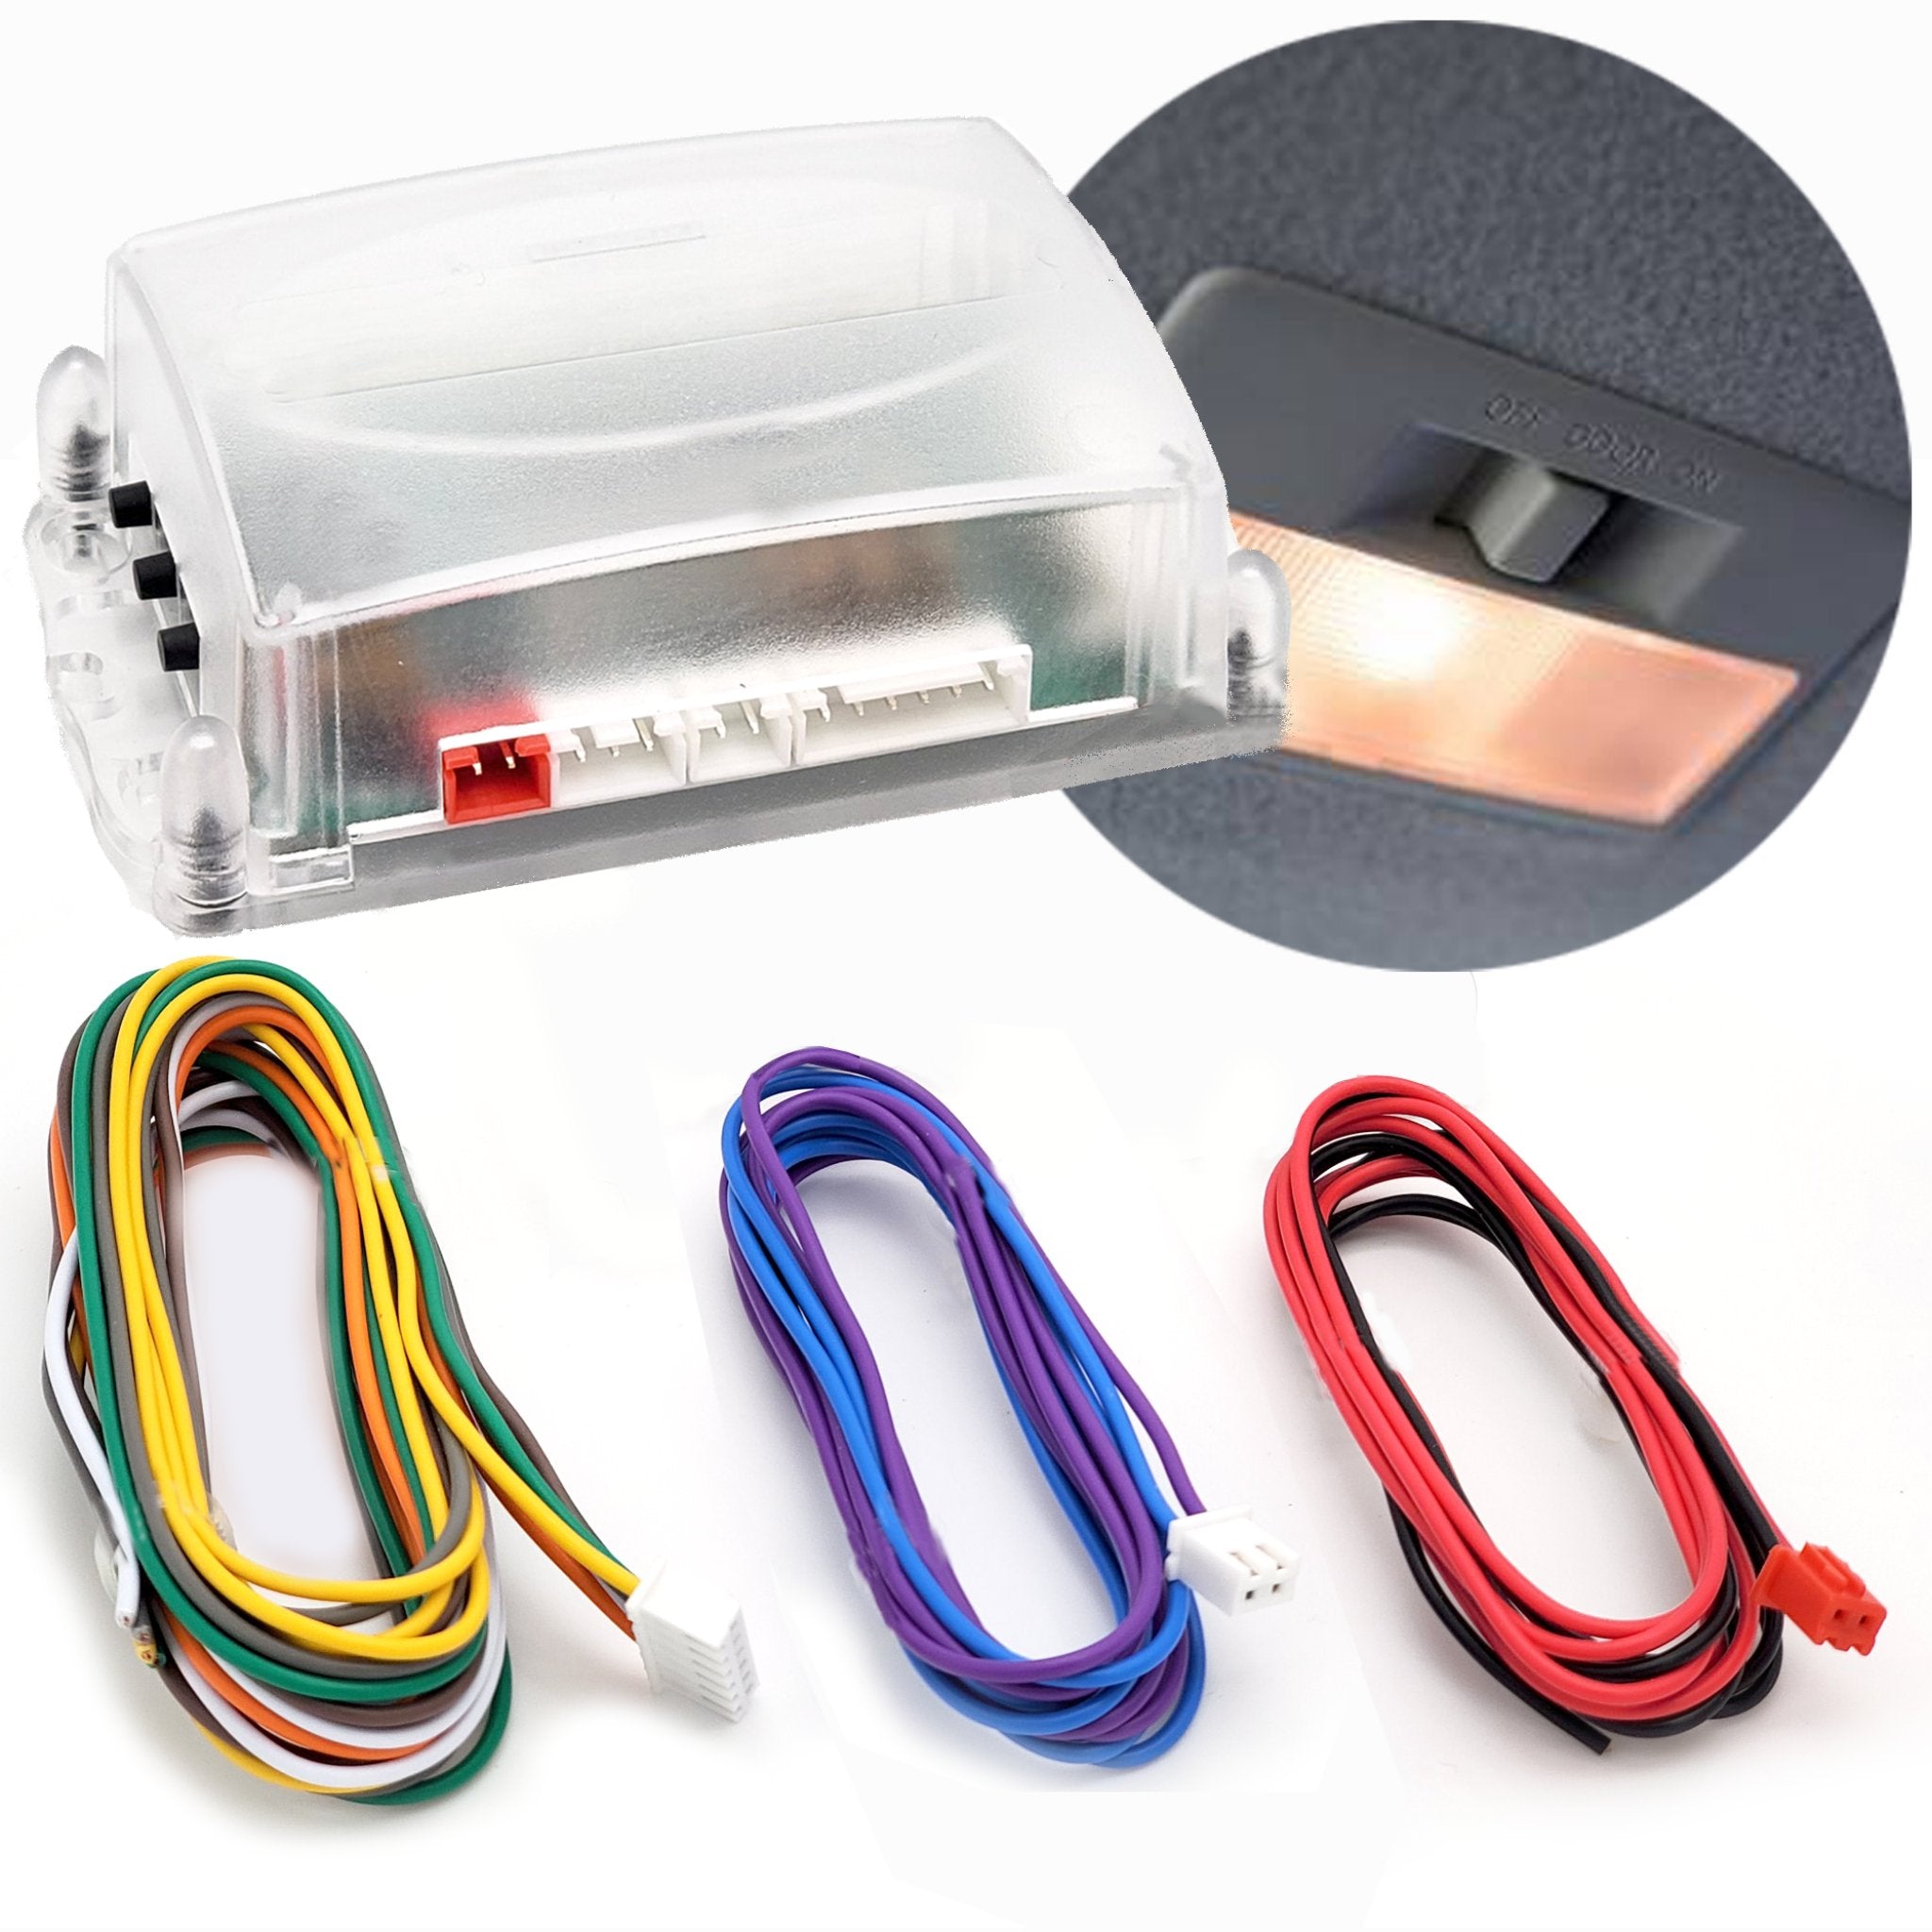 Automatic Car Truck Dome Light Turn Off Controller Module Kit w/ 30 Second Delay